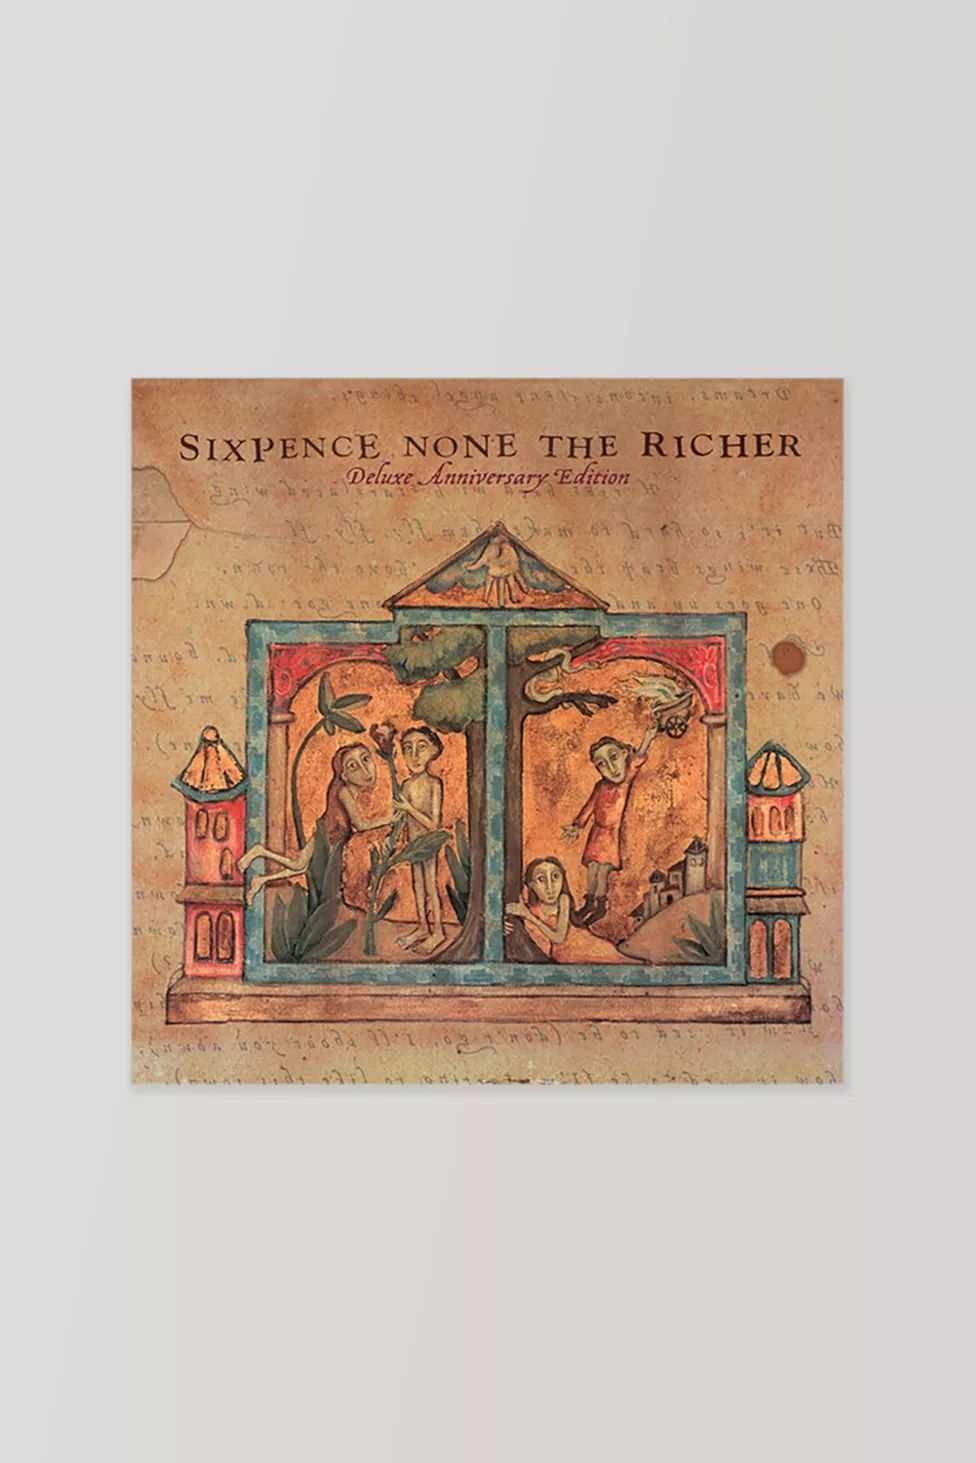 Sixpence None the Richer - Sixpence None the Richer (Deluxe Anniversary Edition)  LP | Urban Outfitters (US and RoW)